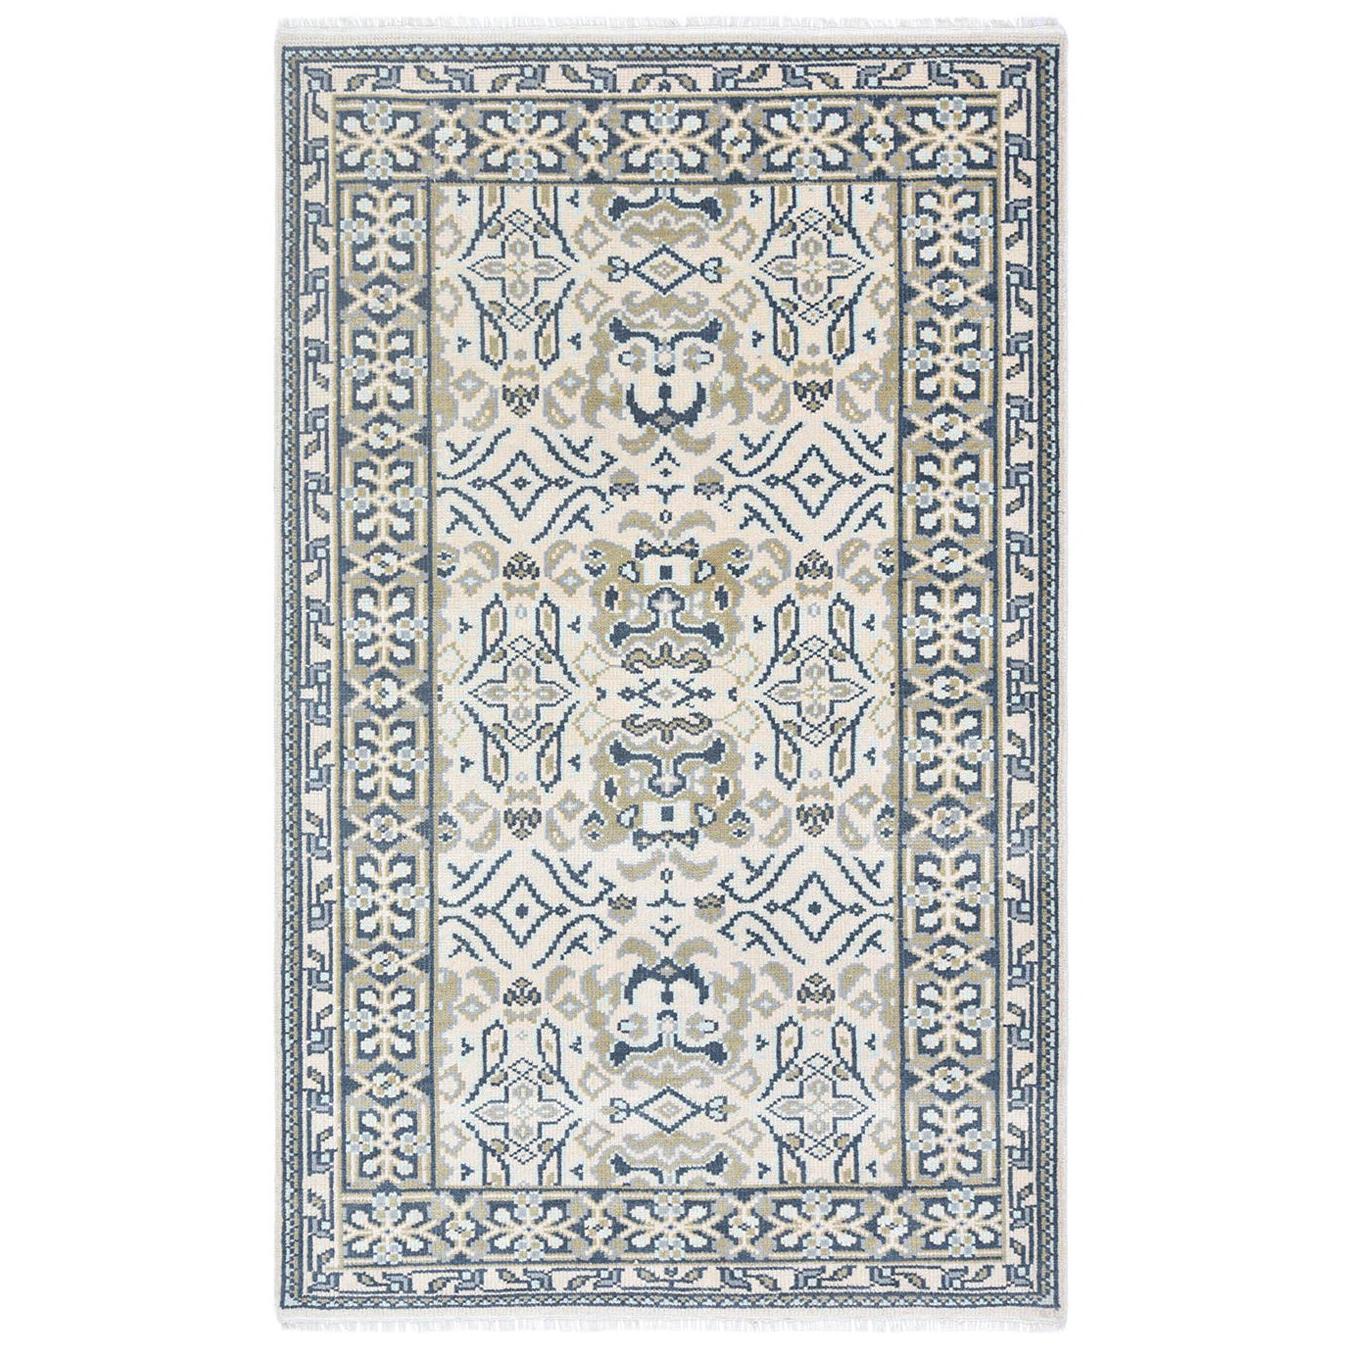 Indian Made Hand-Knotted Traditional Patterned & Floral Area Rug